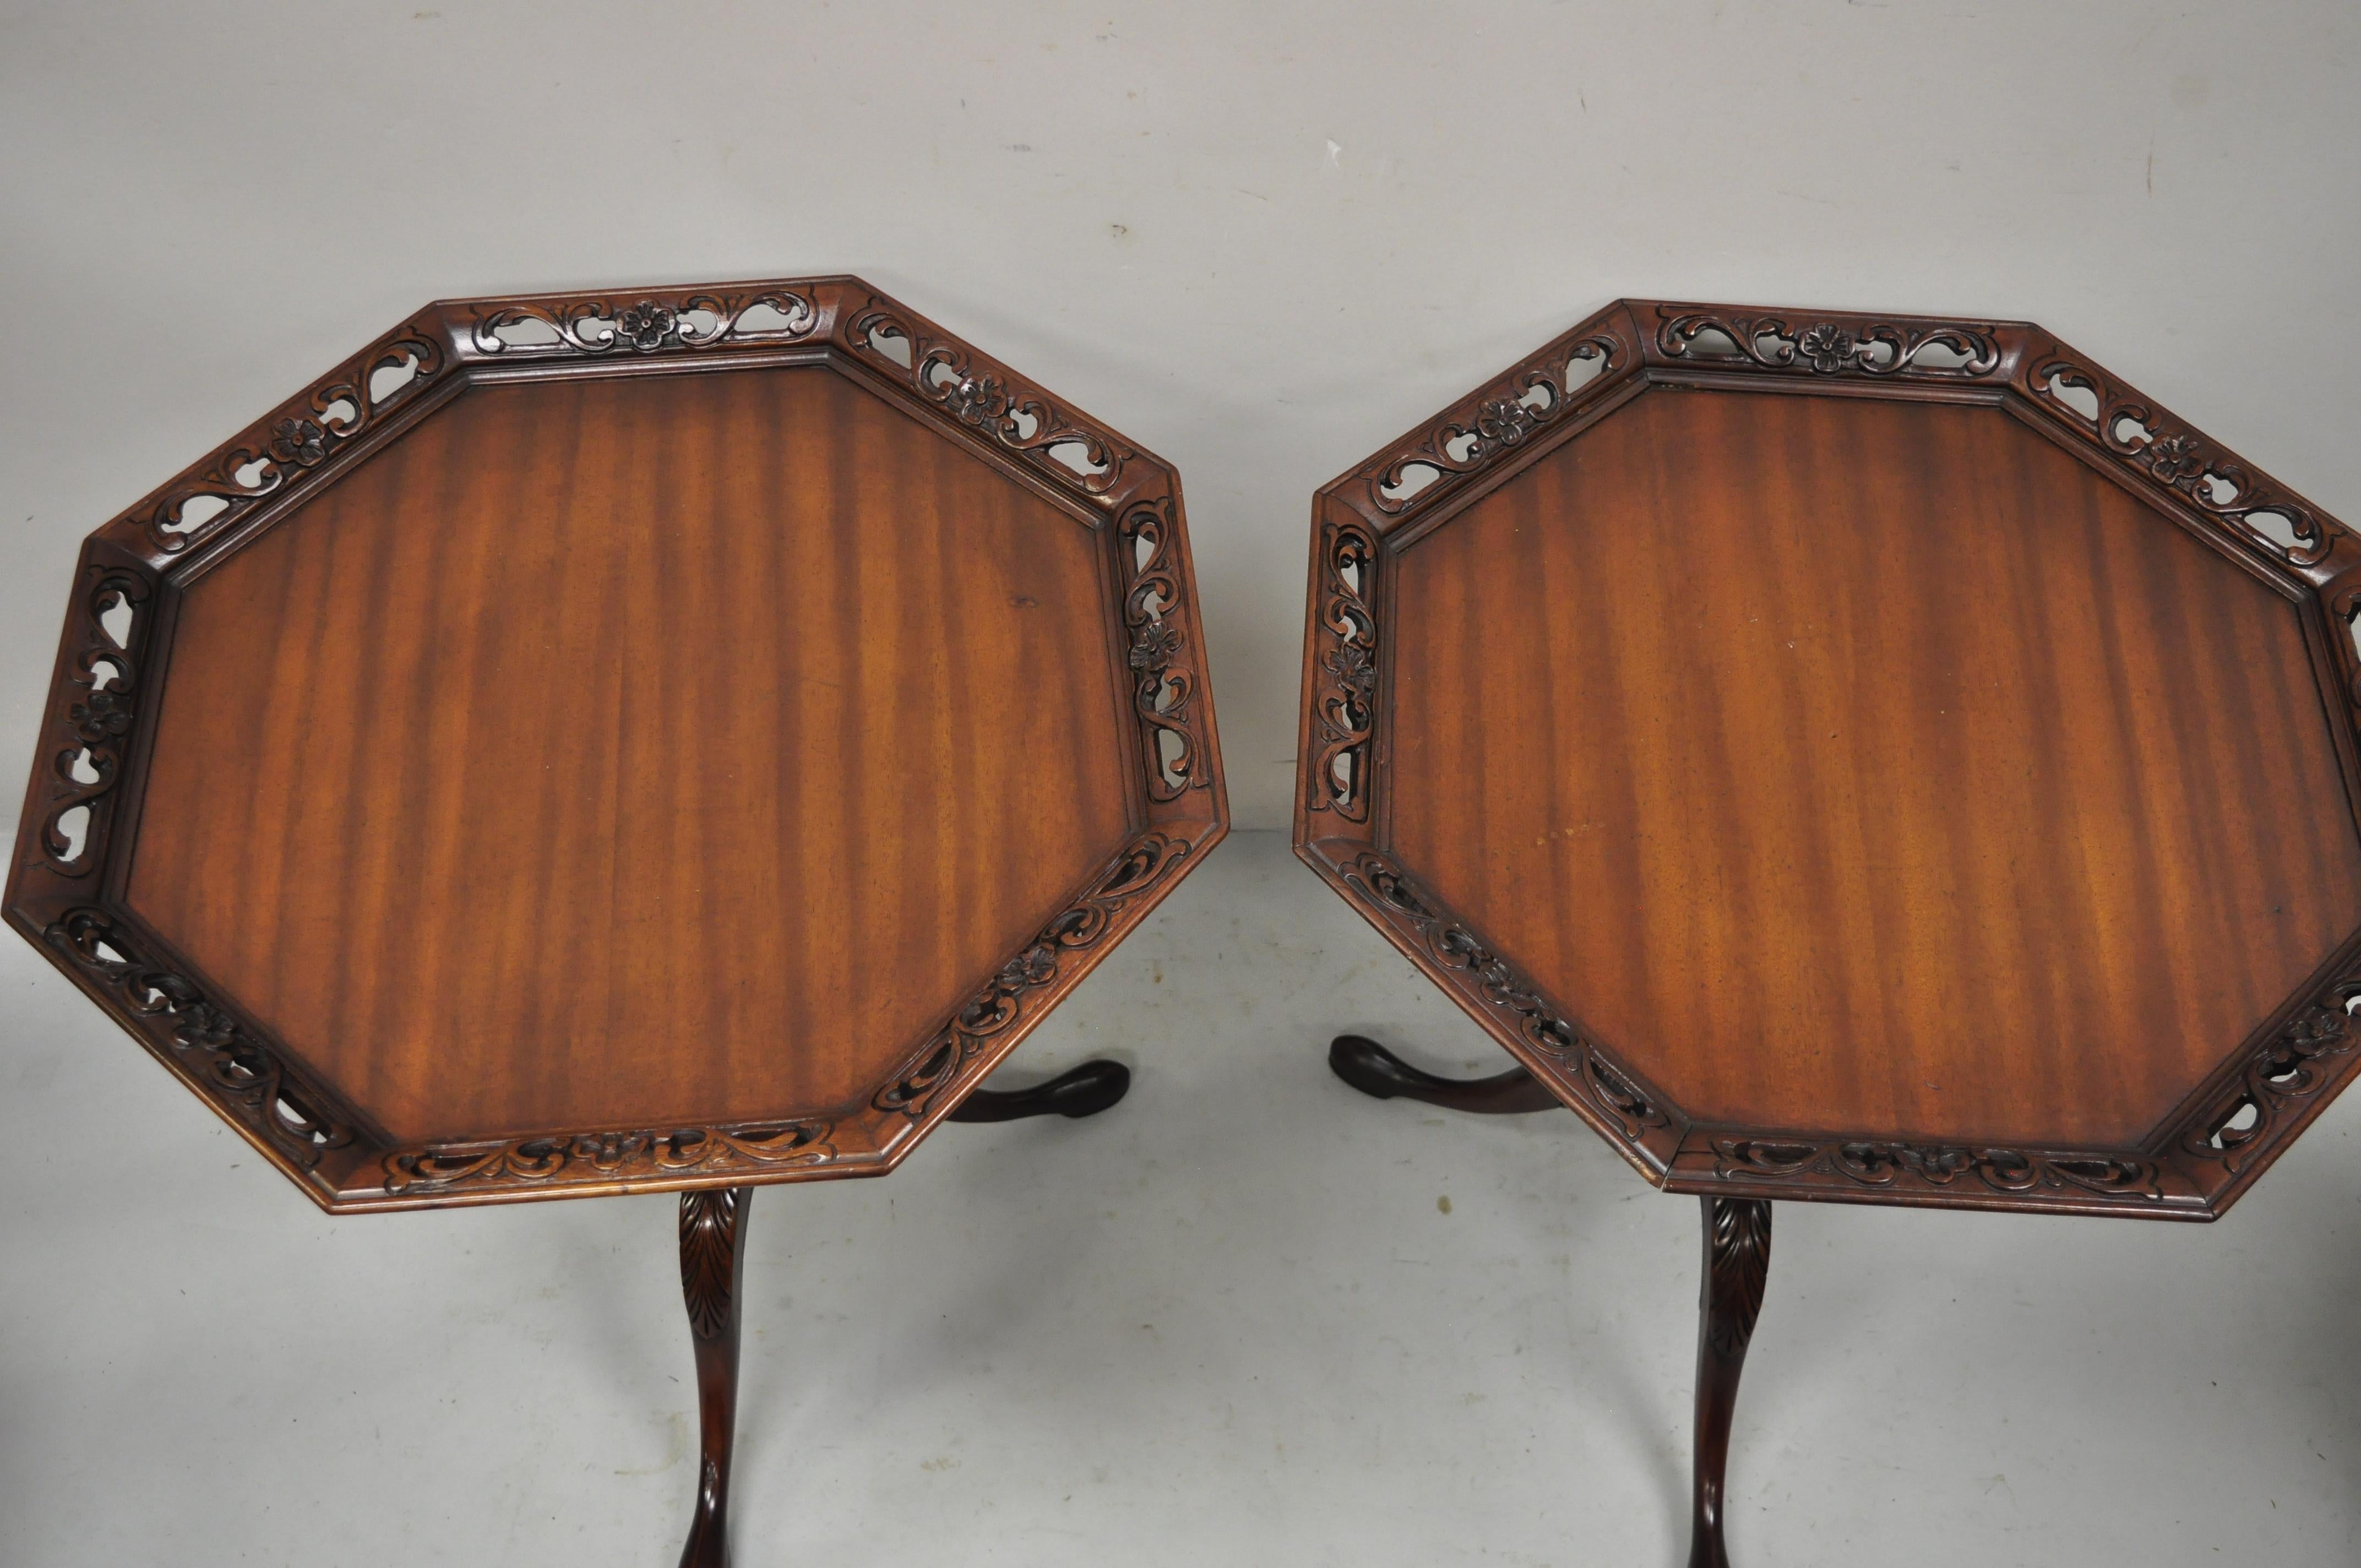 Antique Weiman Heirloom mahogany Regency style pie crust side lamp tables - a Pair. Item features solid wood frame, beautiful wood grain, nicely carved details, original label, shapely saber legs, very nice vintage pair, quality American